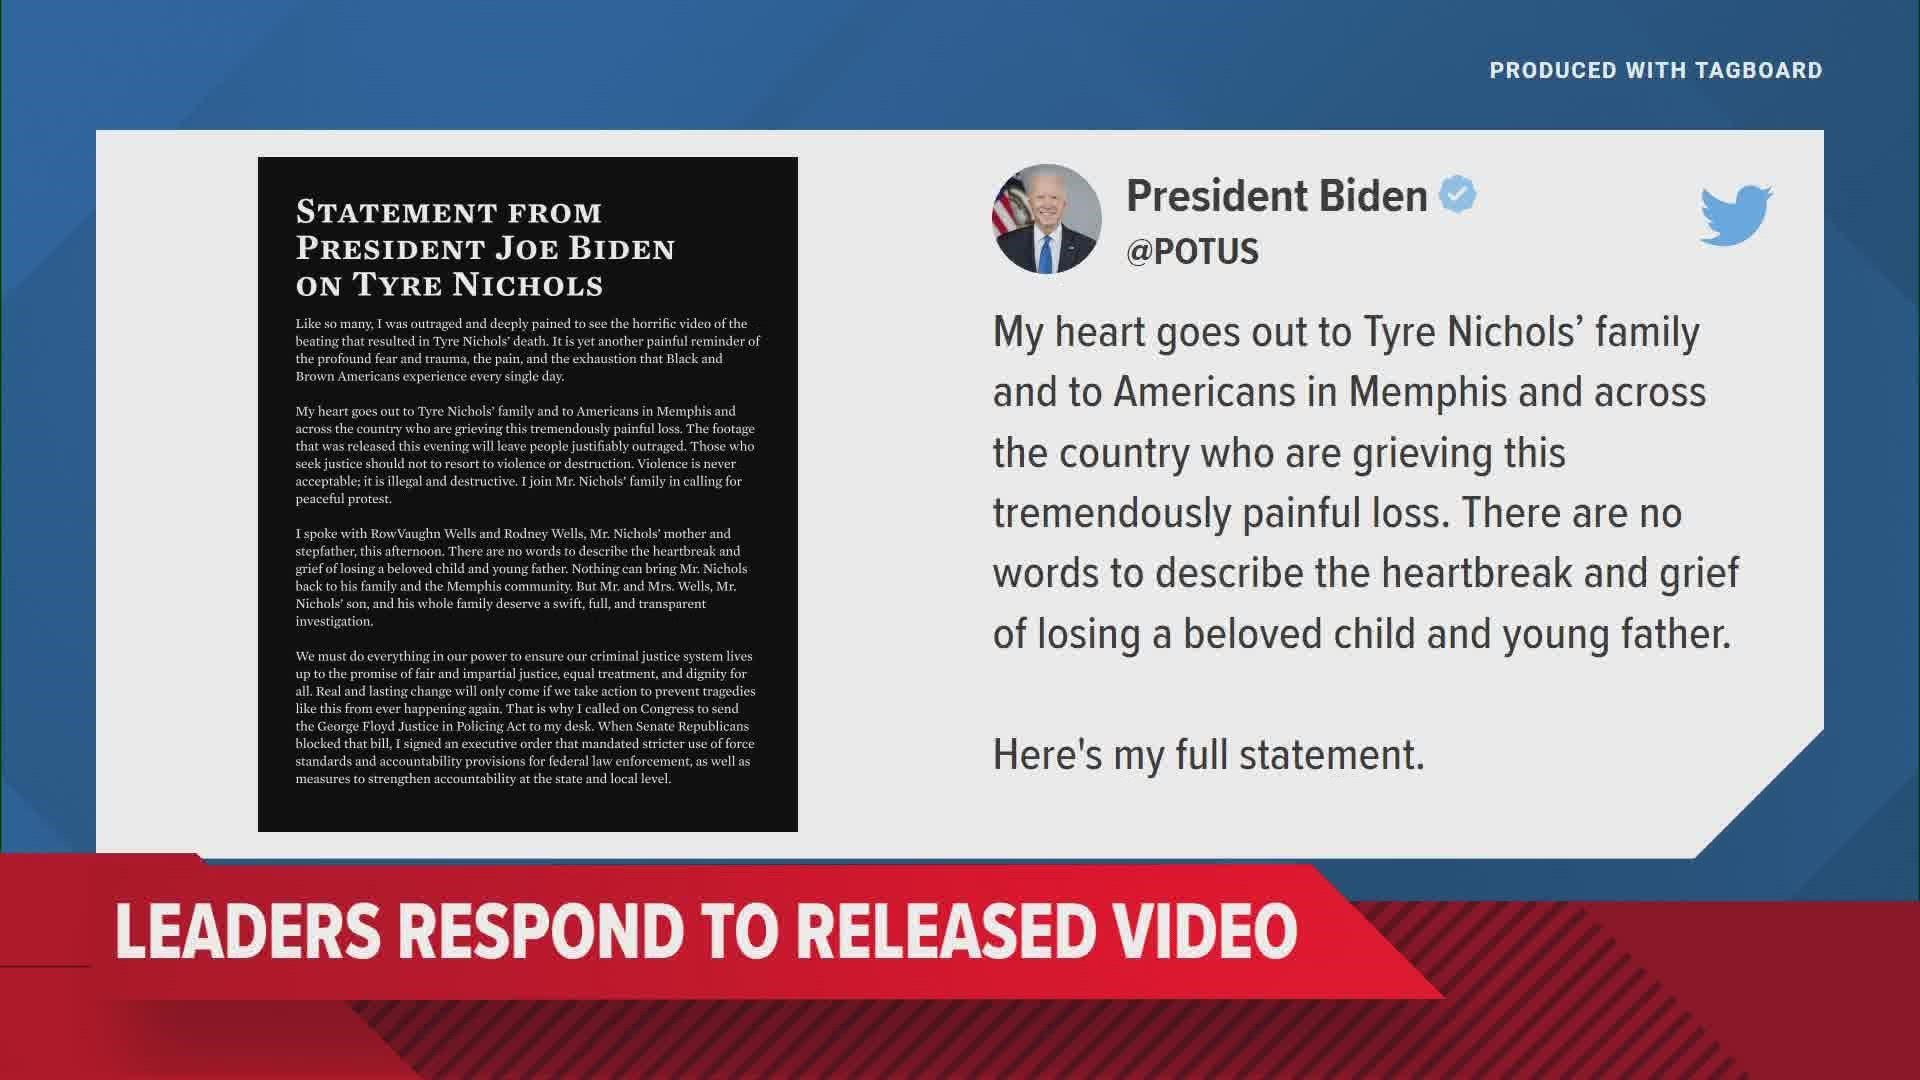 Here's what President Biden and others said about the video.